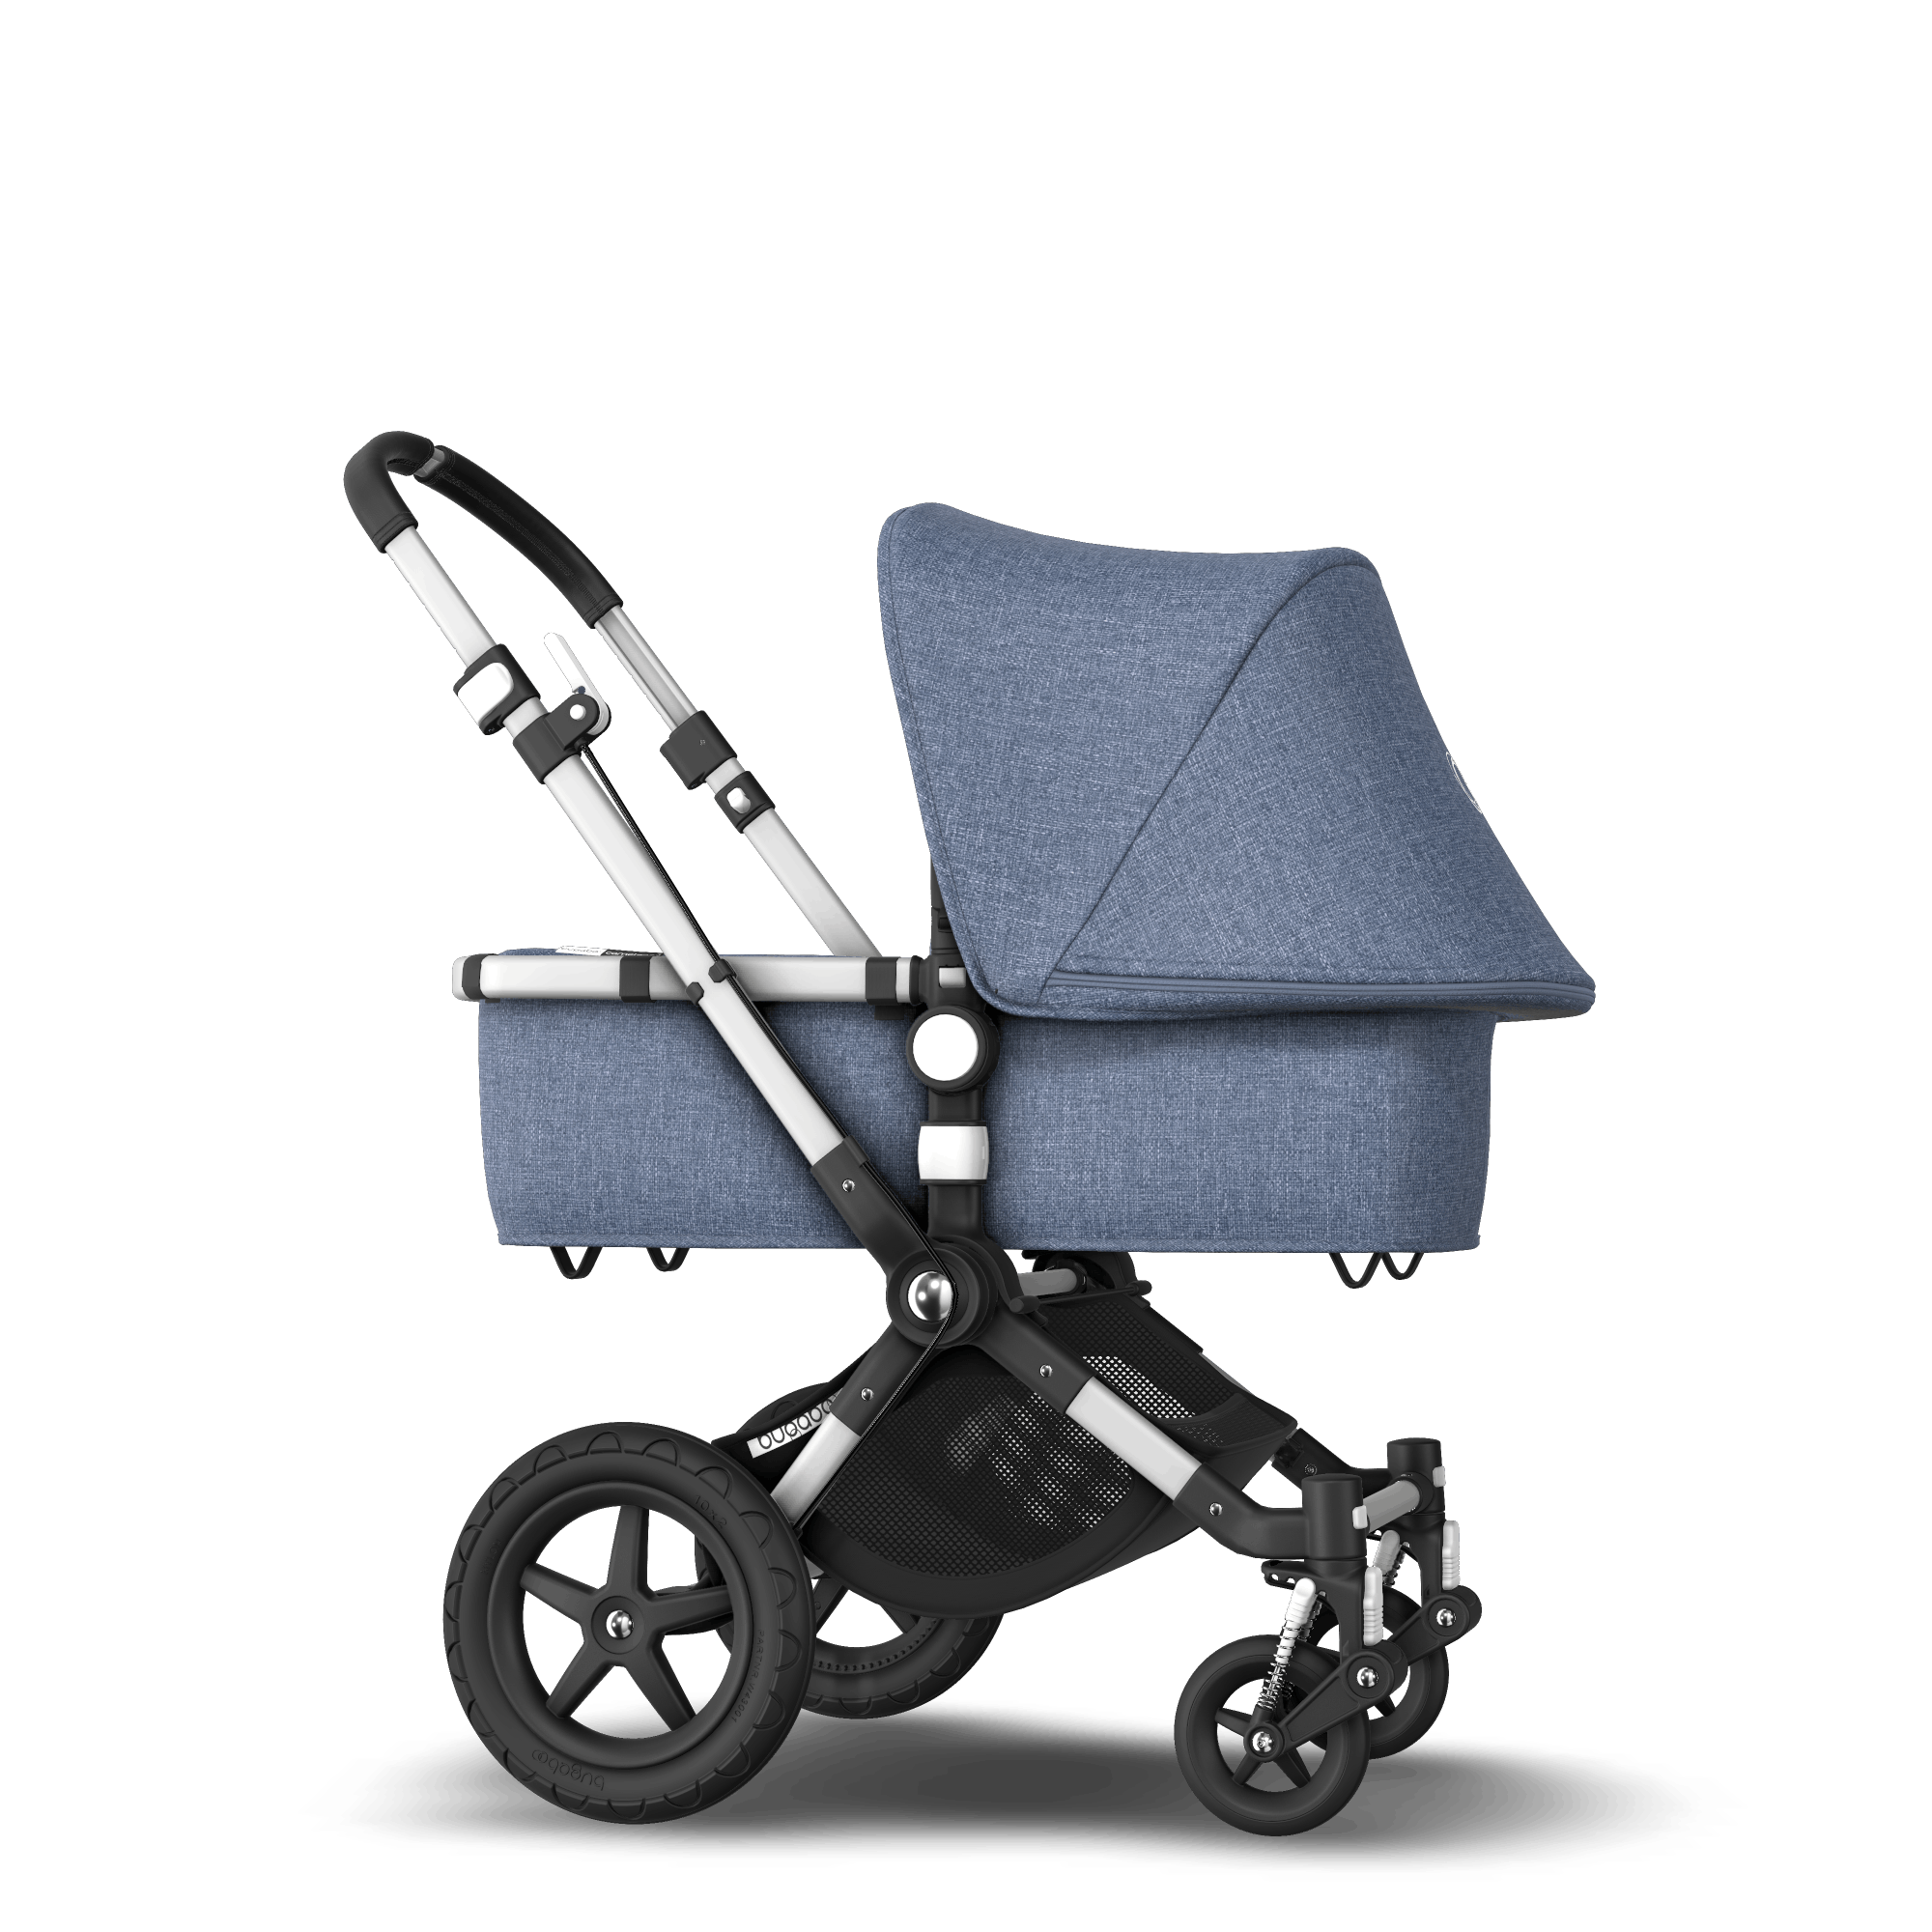 best car seat for bugaboo cameleon 3